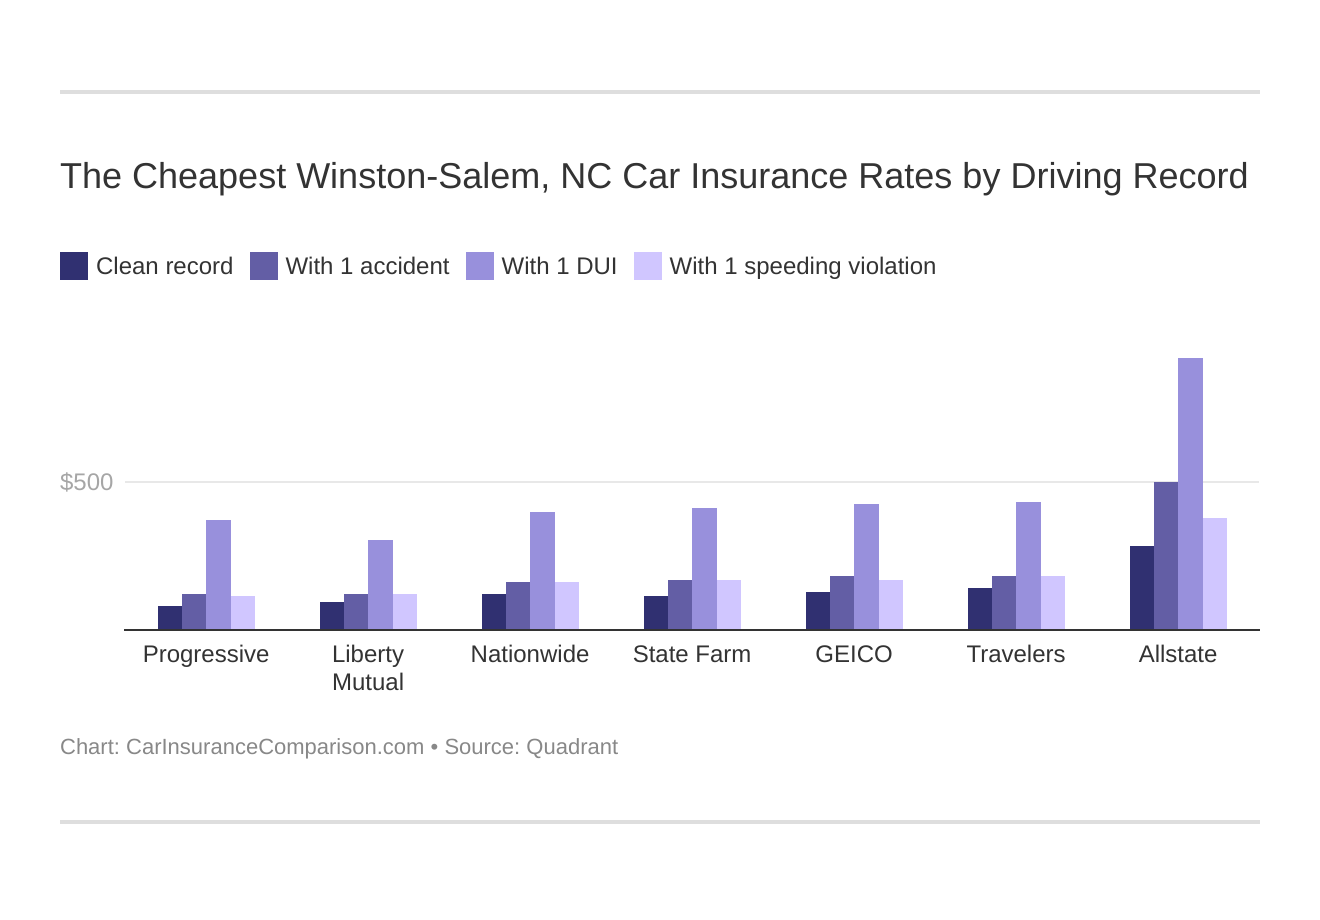 The Cheapest Winston-Salem, NC Car Insurance Rates by Driving Record